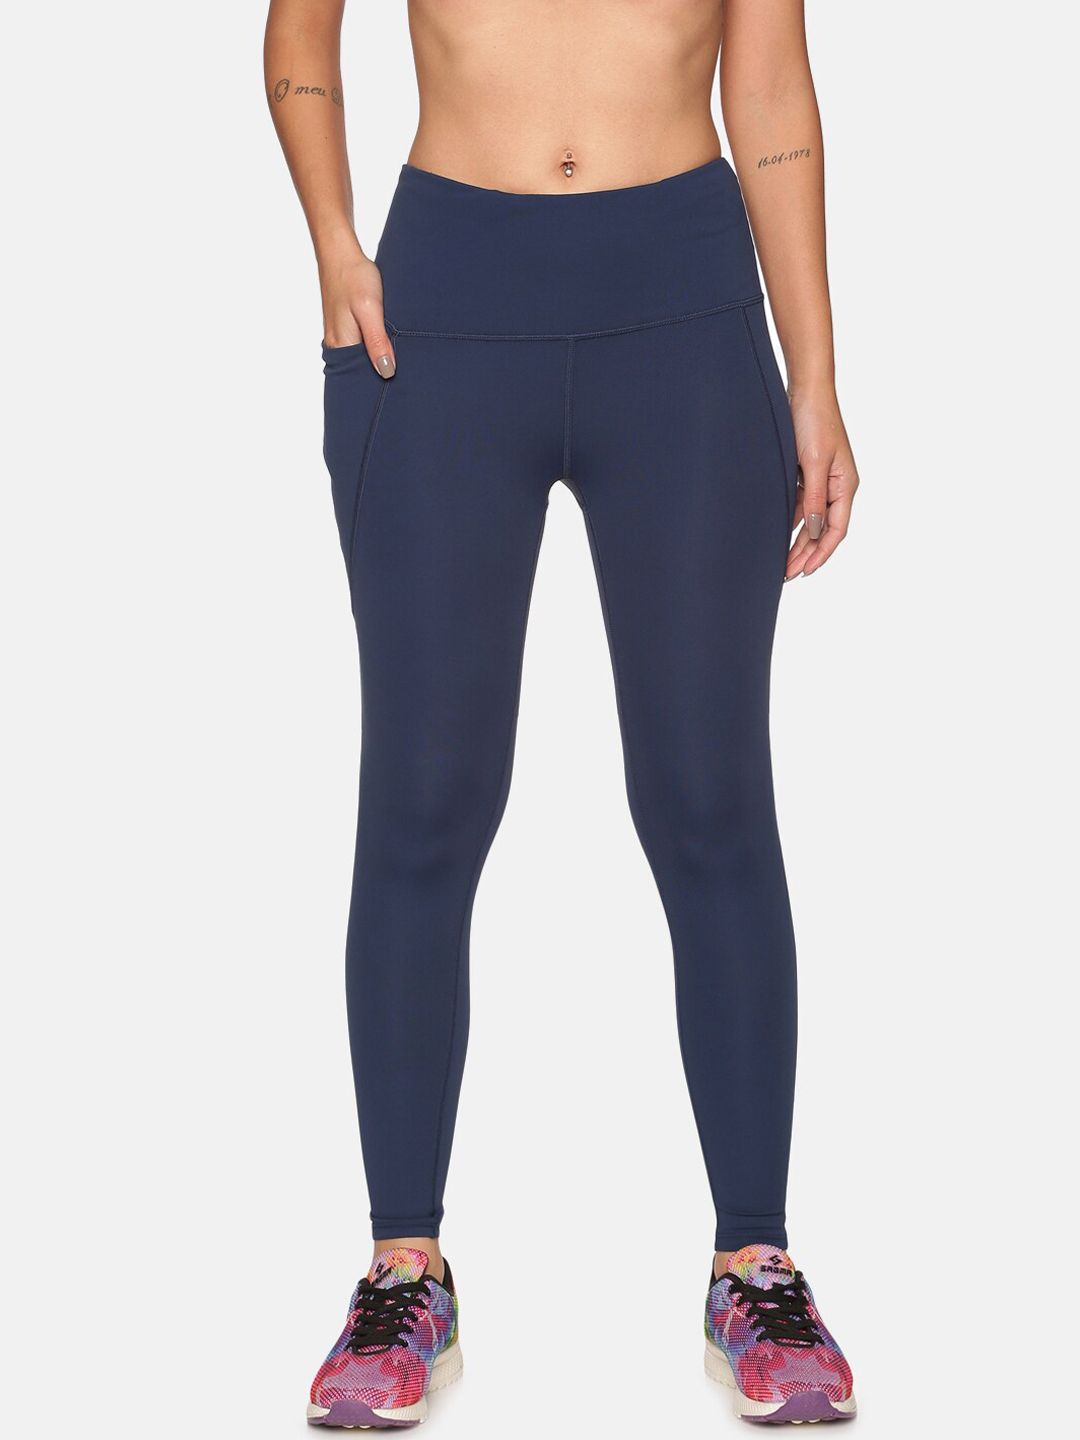 BlissClub Women Navy Blue Super Stretchy and High Waisted The Ultimate Leggings Price in India